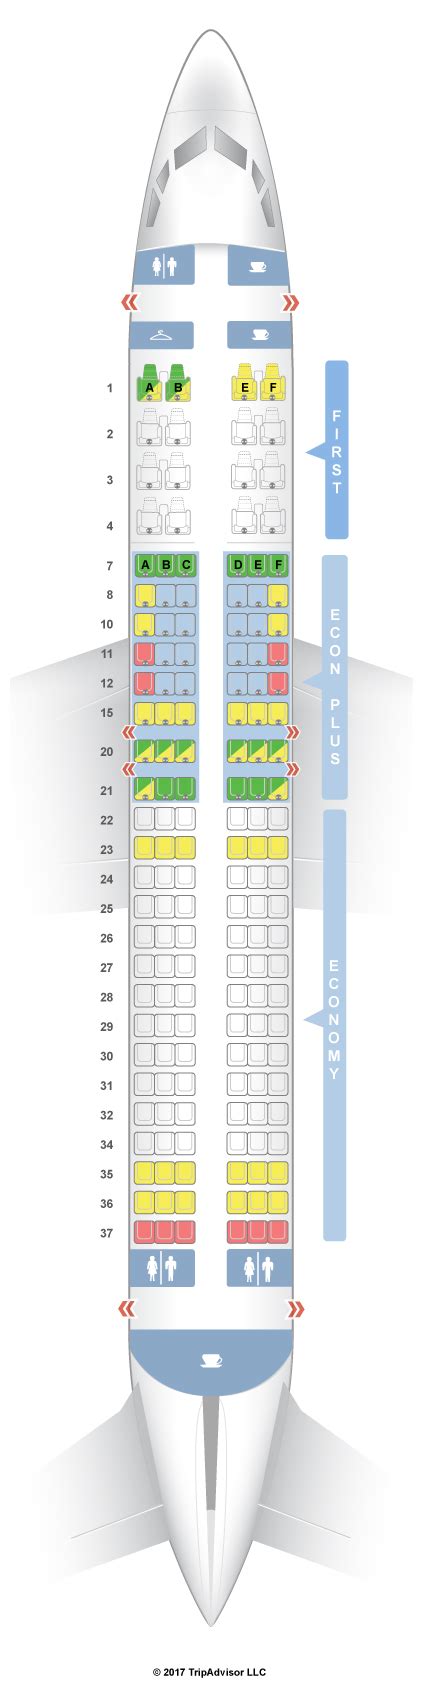 united boeing 737 800 seat map